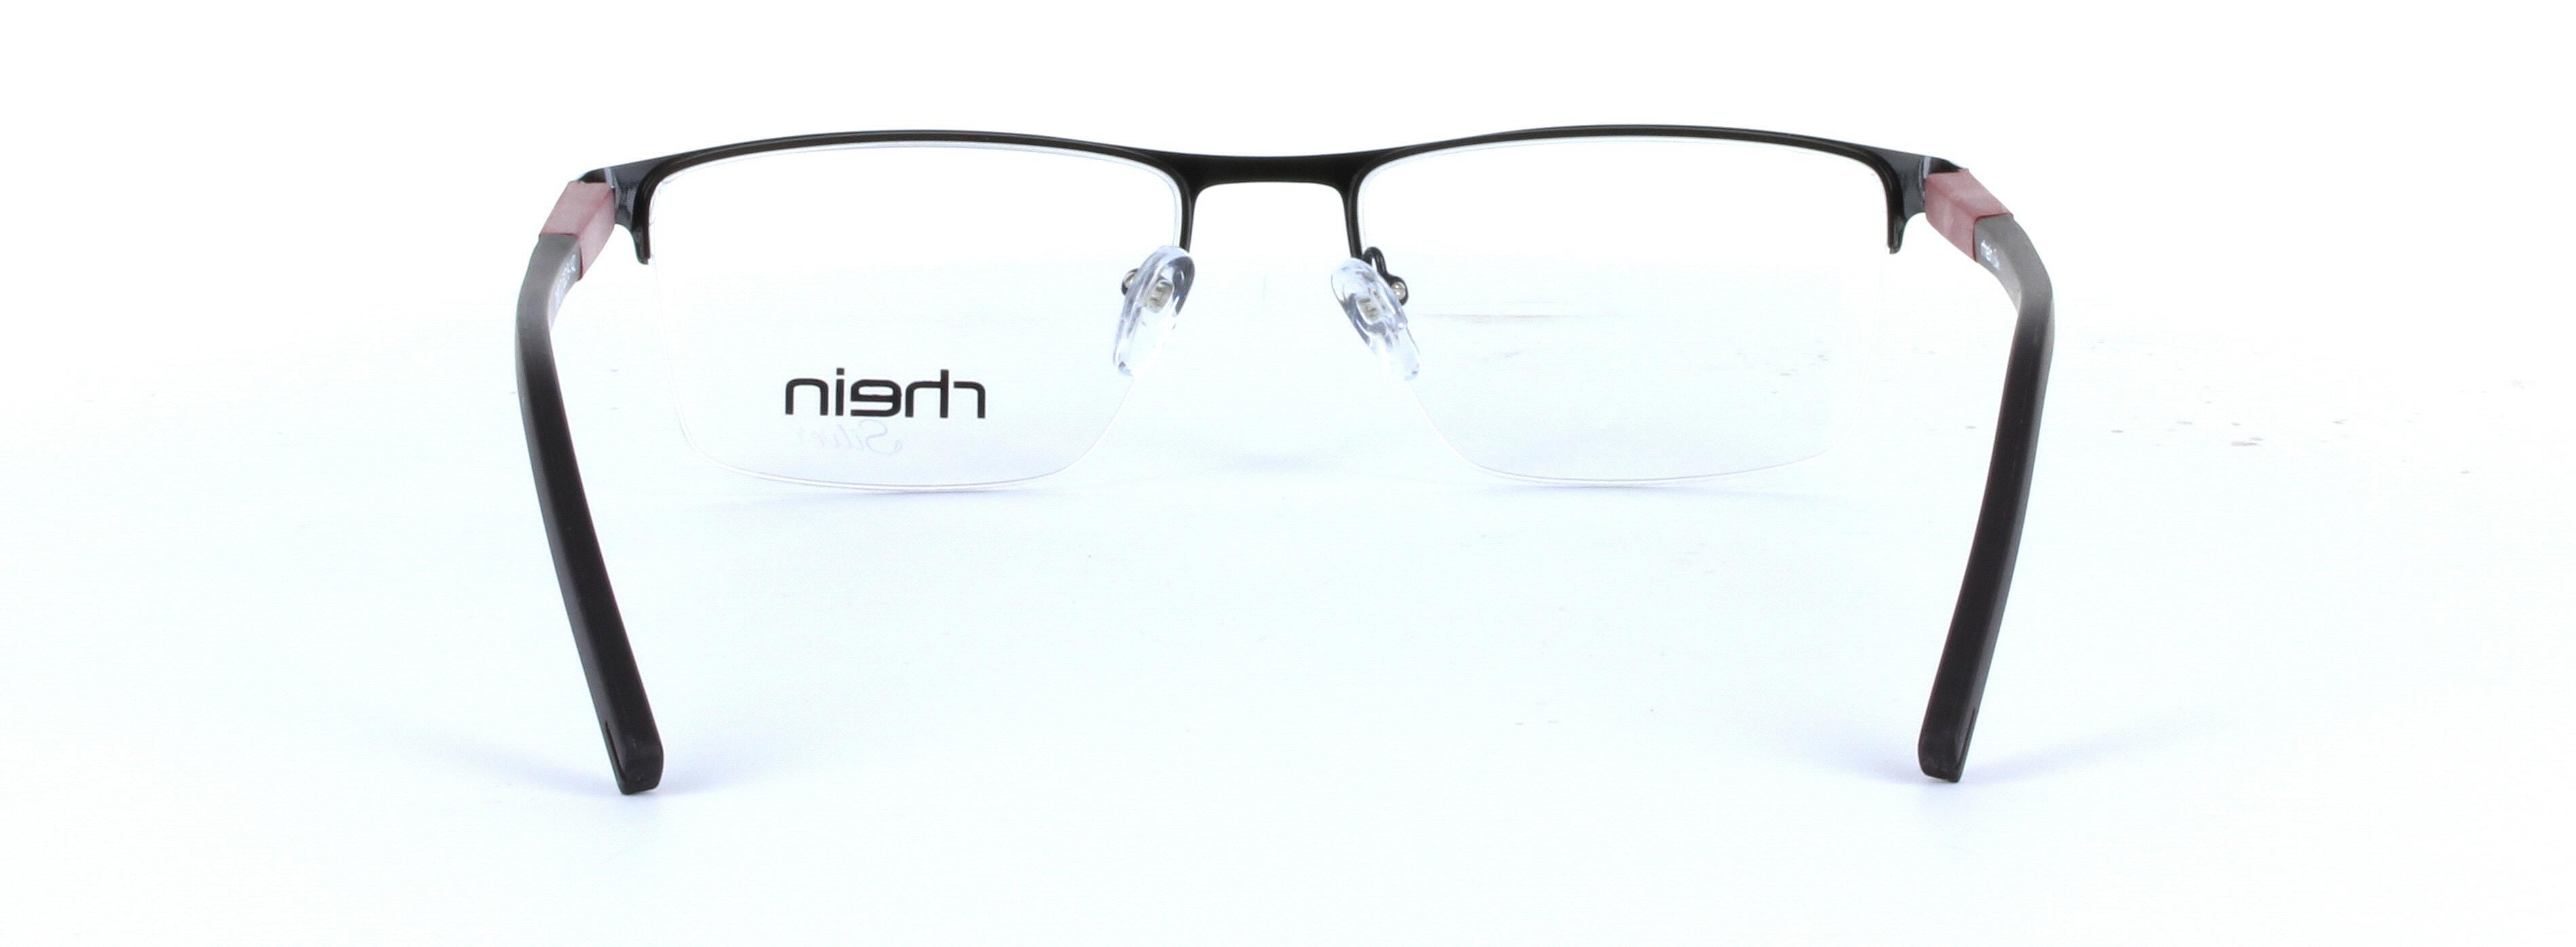 Dell Black and Red Semi Rimless Rectangular Metal Glasses - Image View 3